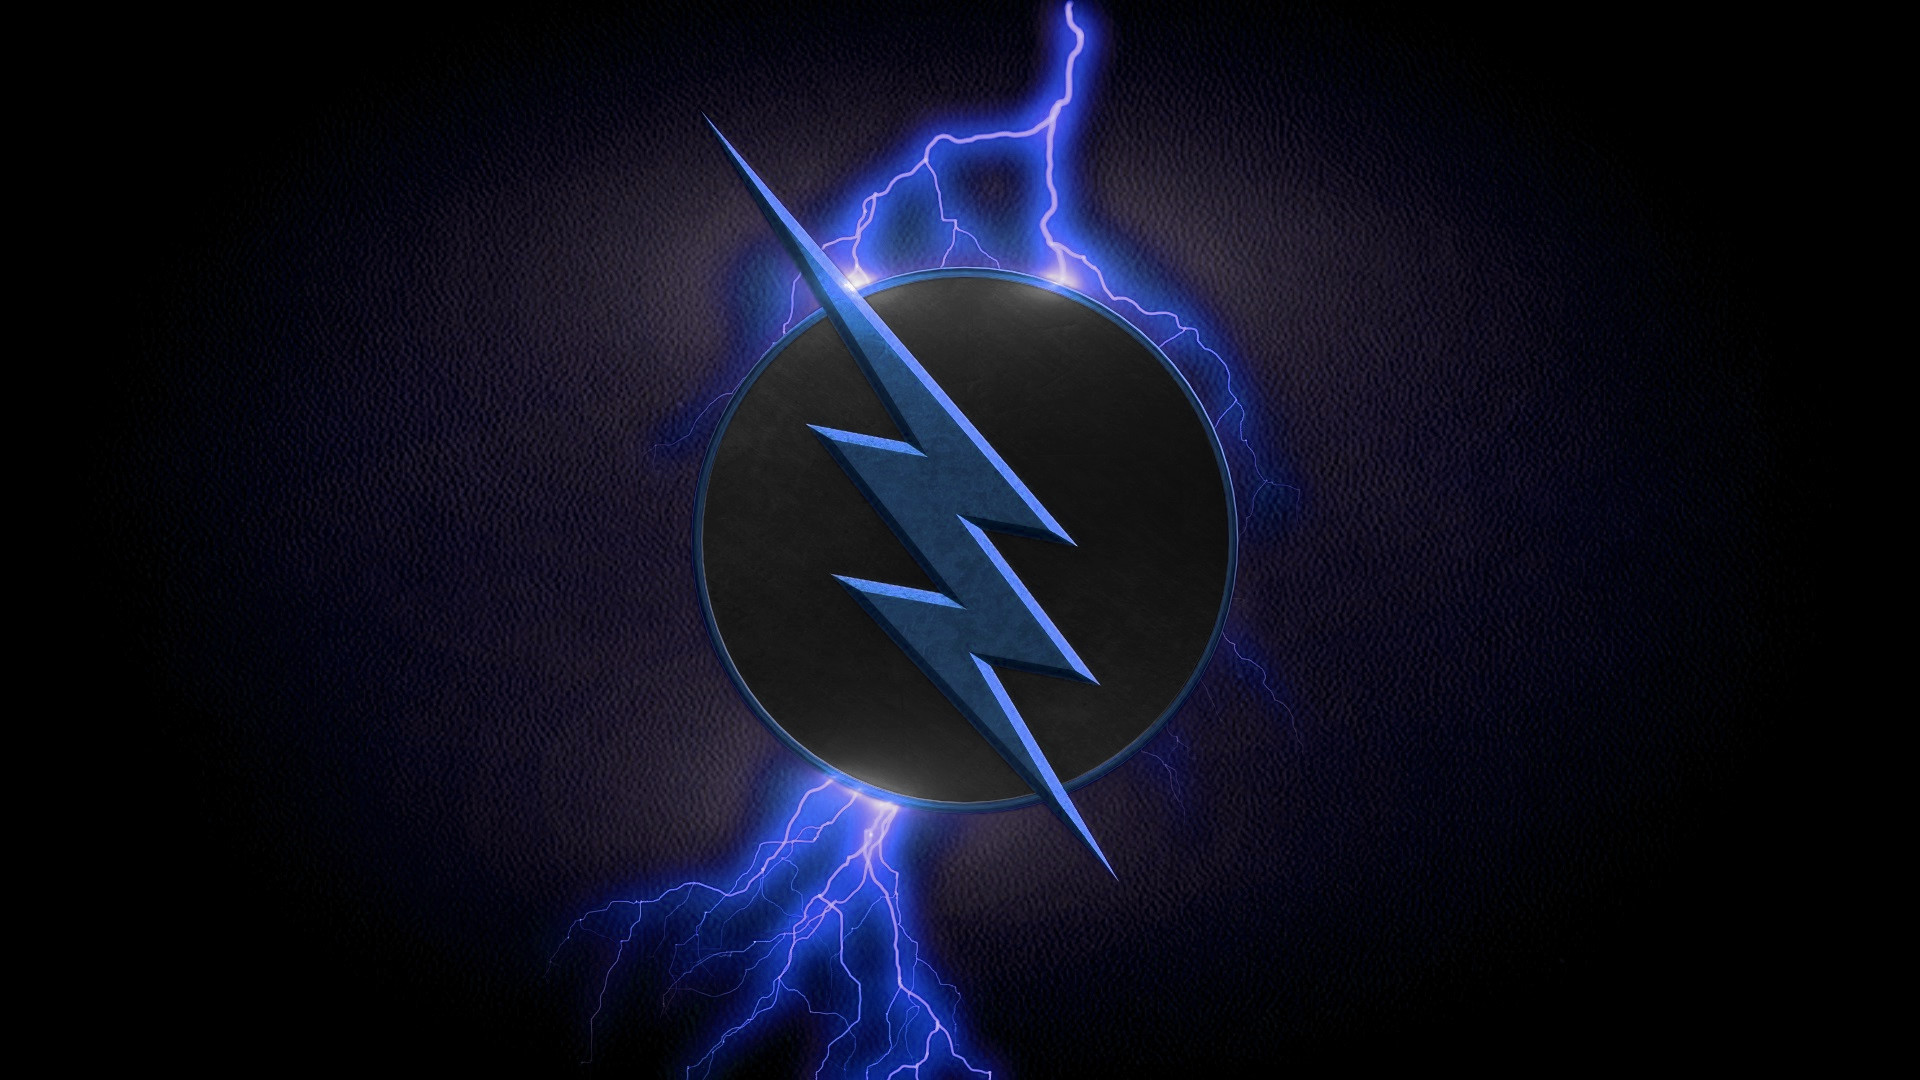 The Flash Zoom Wallpaper 75 Images